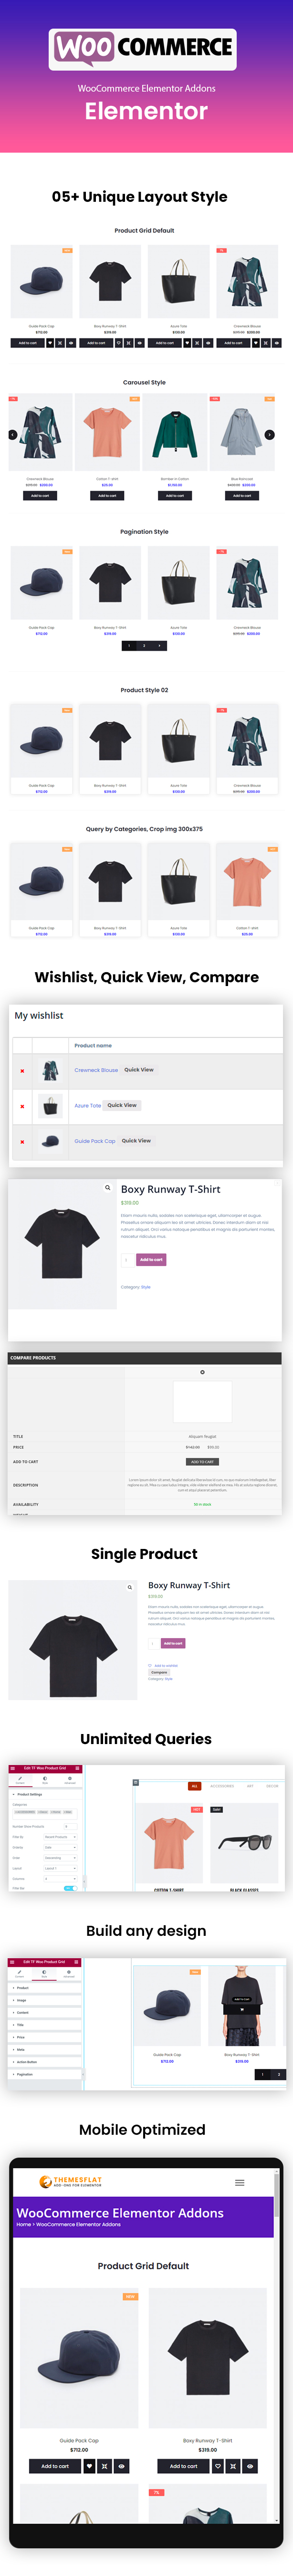 TFProduct - WooCommerce Product Elementor Addons